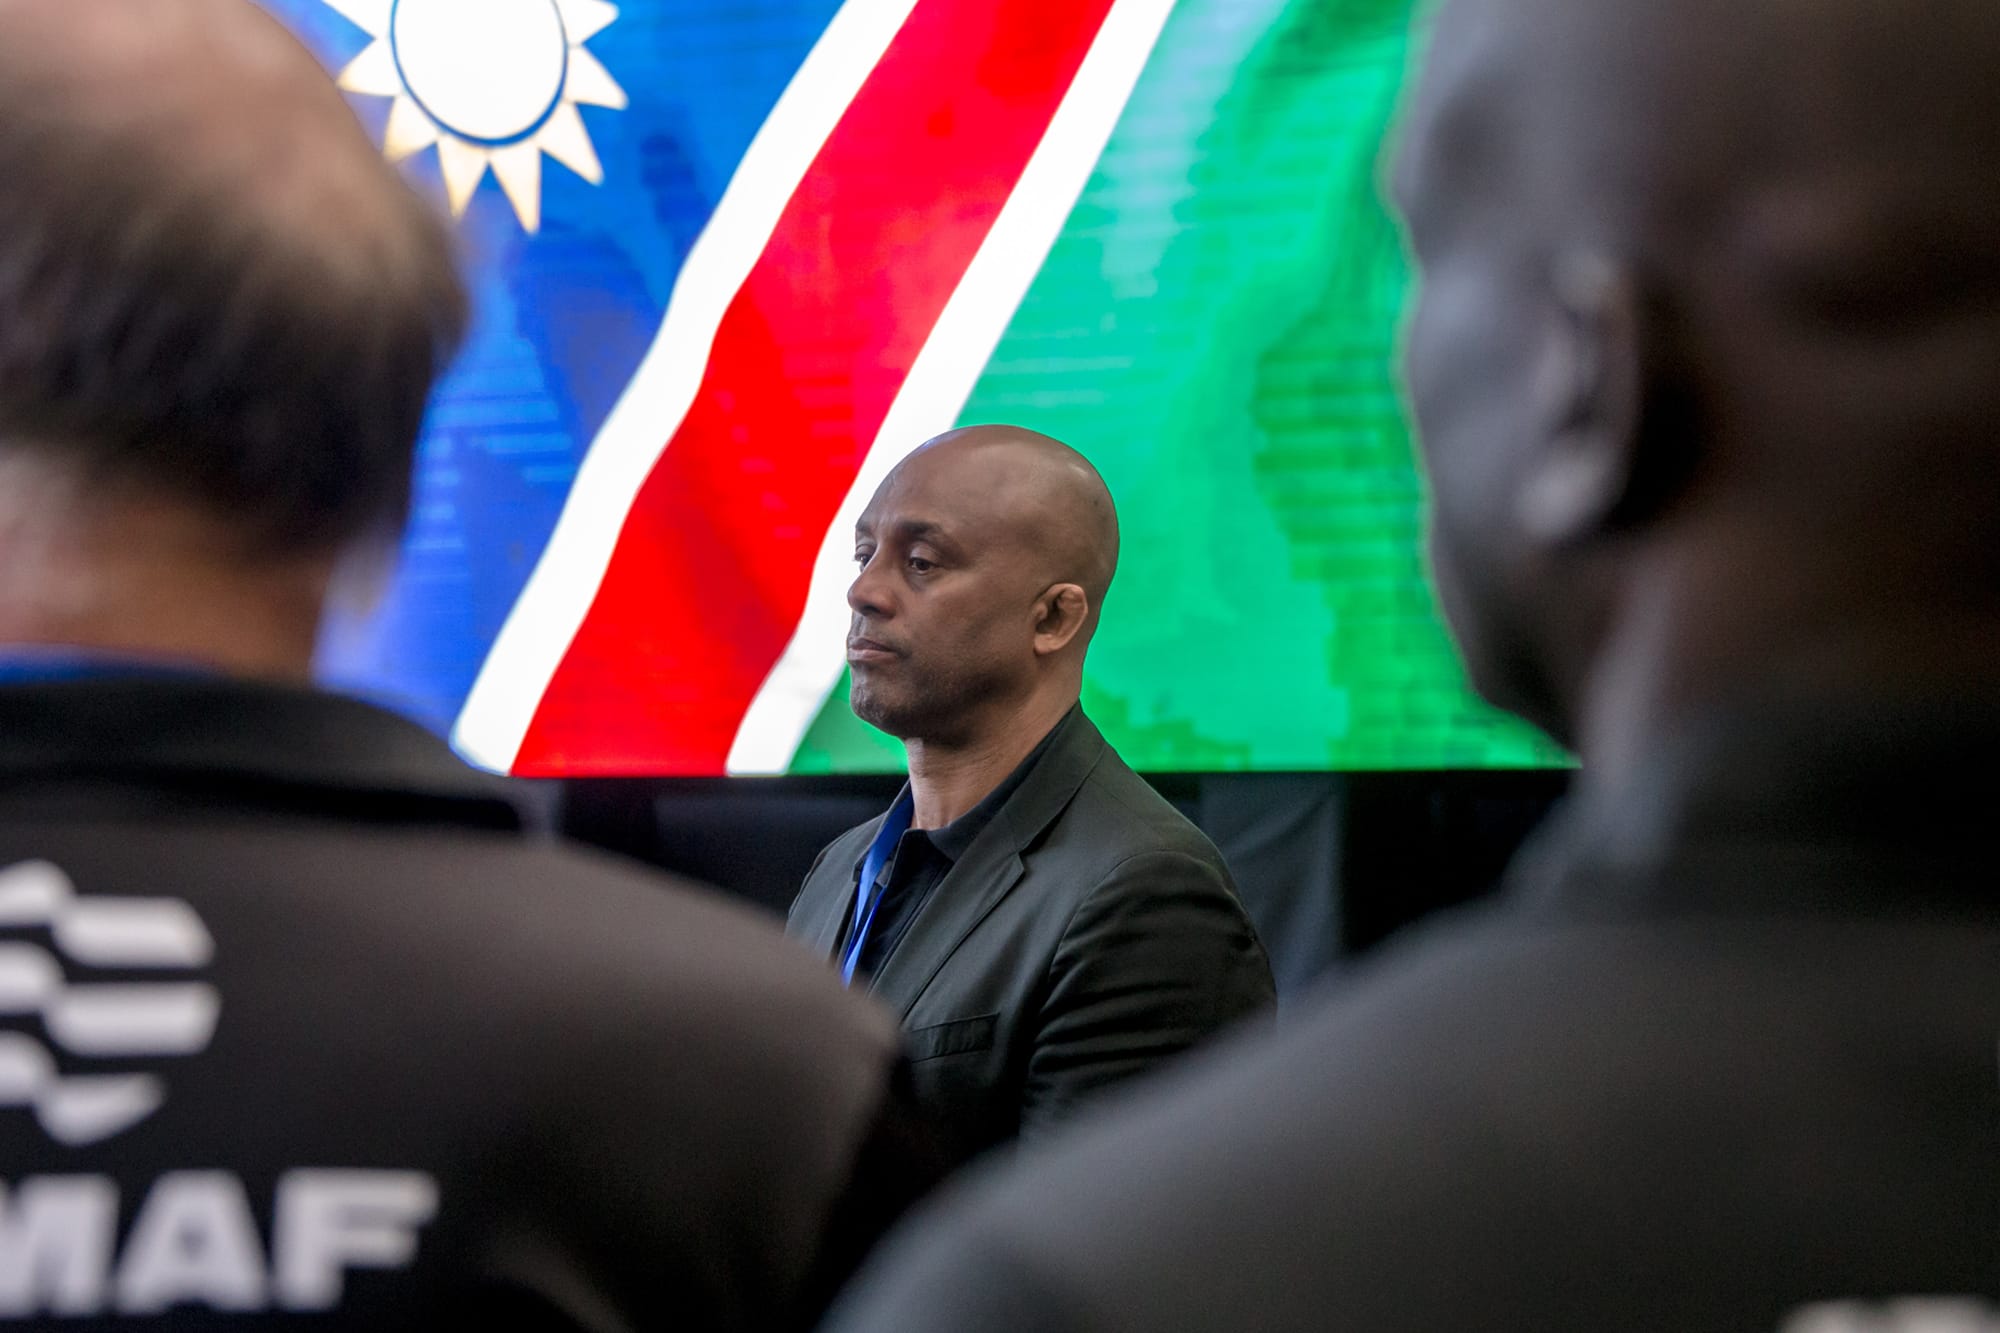 A message from IMMAF President Kerrith Brown